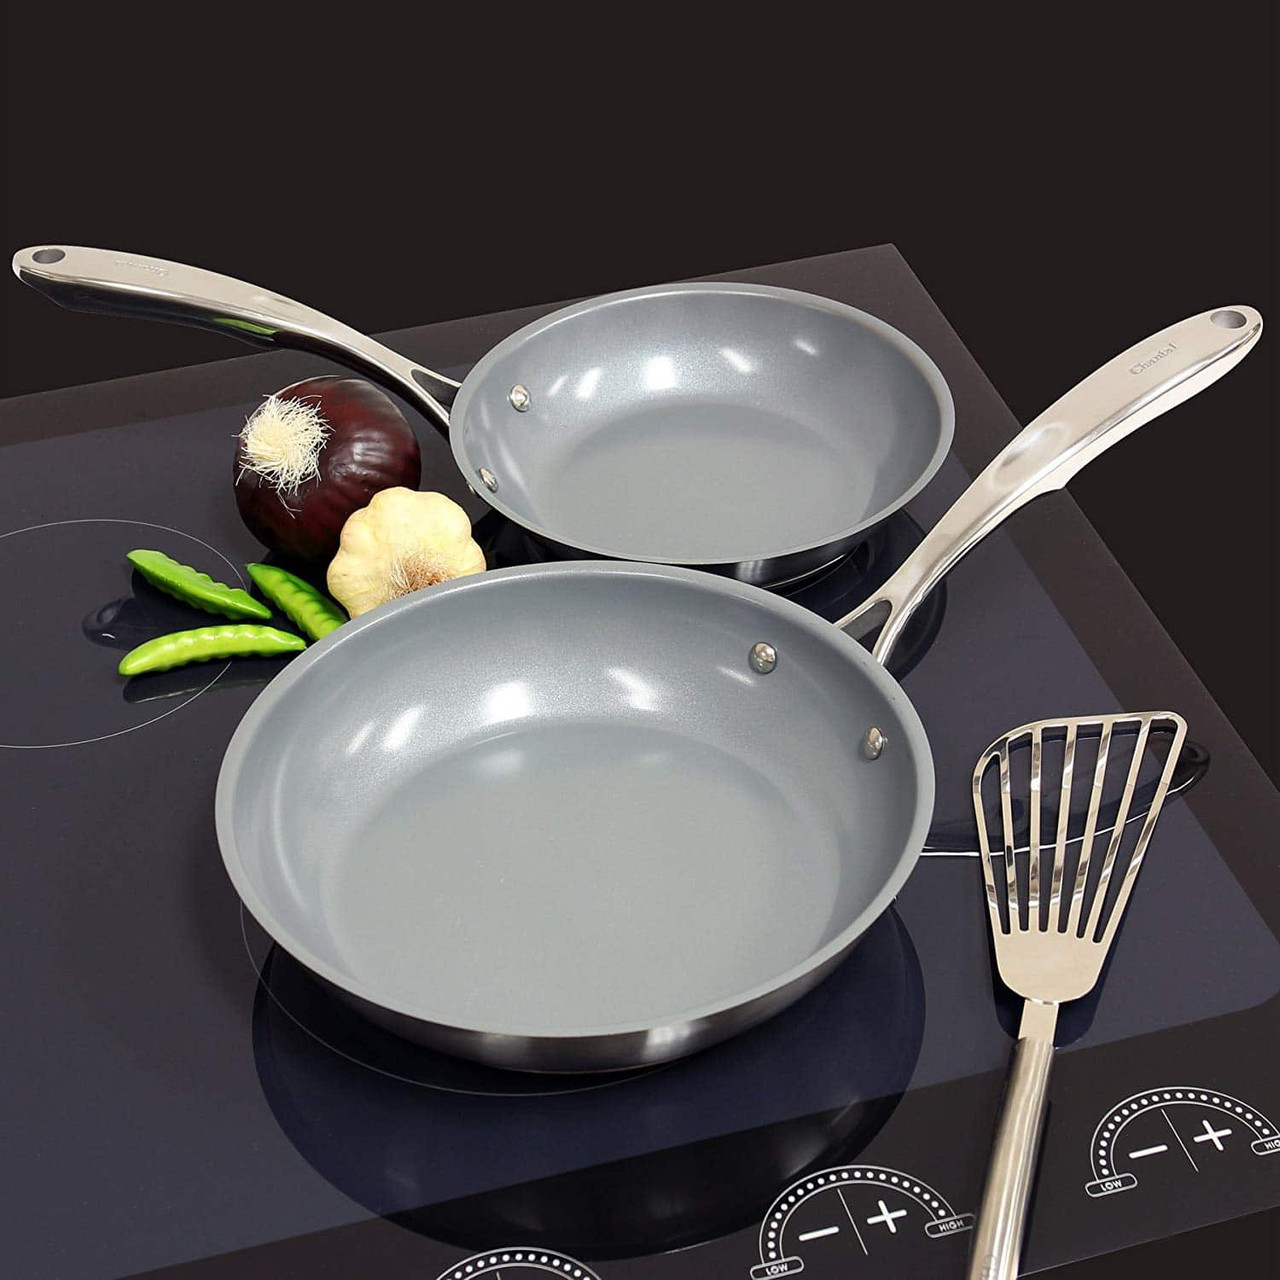 https://cdn11.bigcommerce.com/s-hccytny0od/images/stencil/1280x1280/products/2680/9401/chantal-induction-21-steel-ceramic-coated-fry-pan-set-2__34524.1586889522.jpg?c=2?imbypass=on